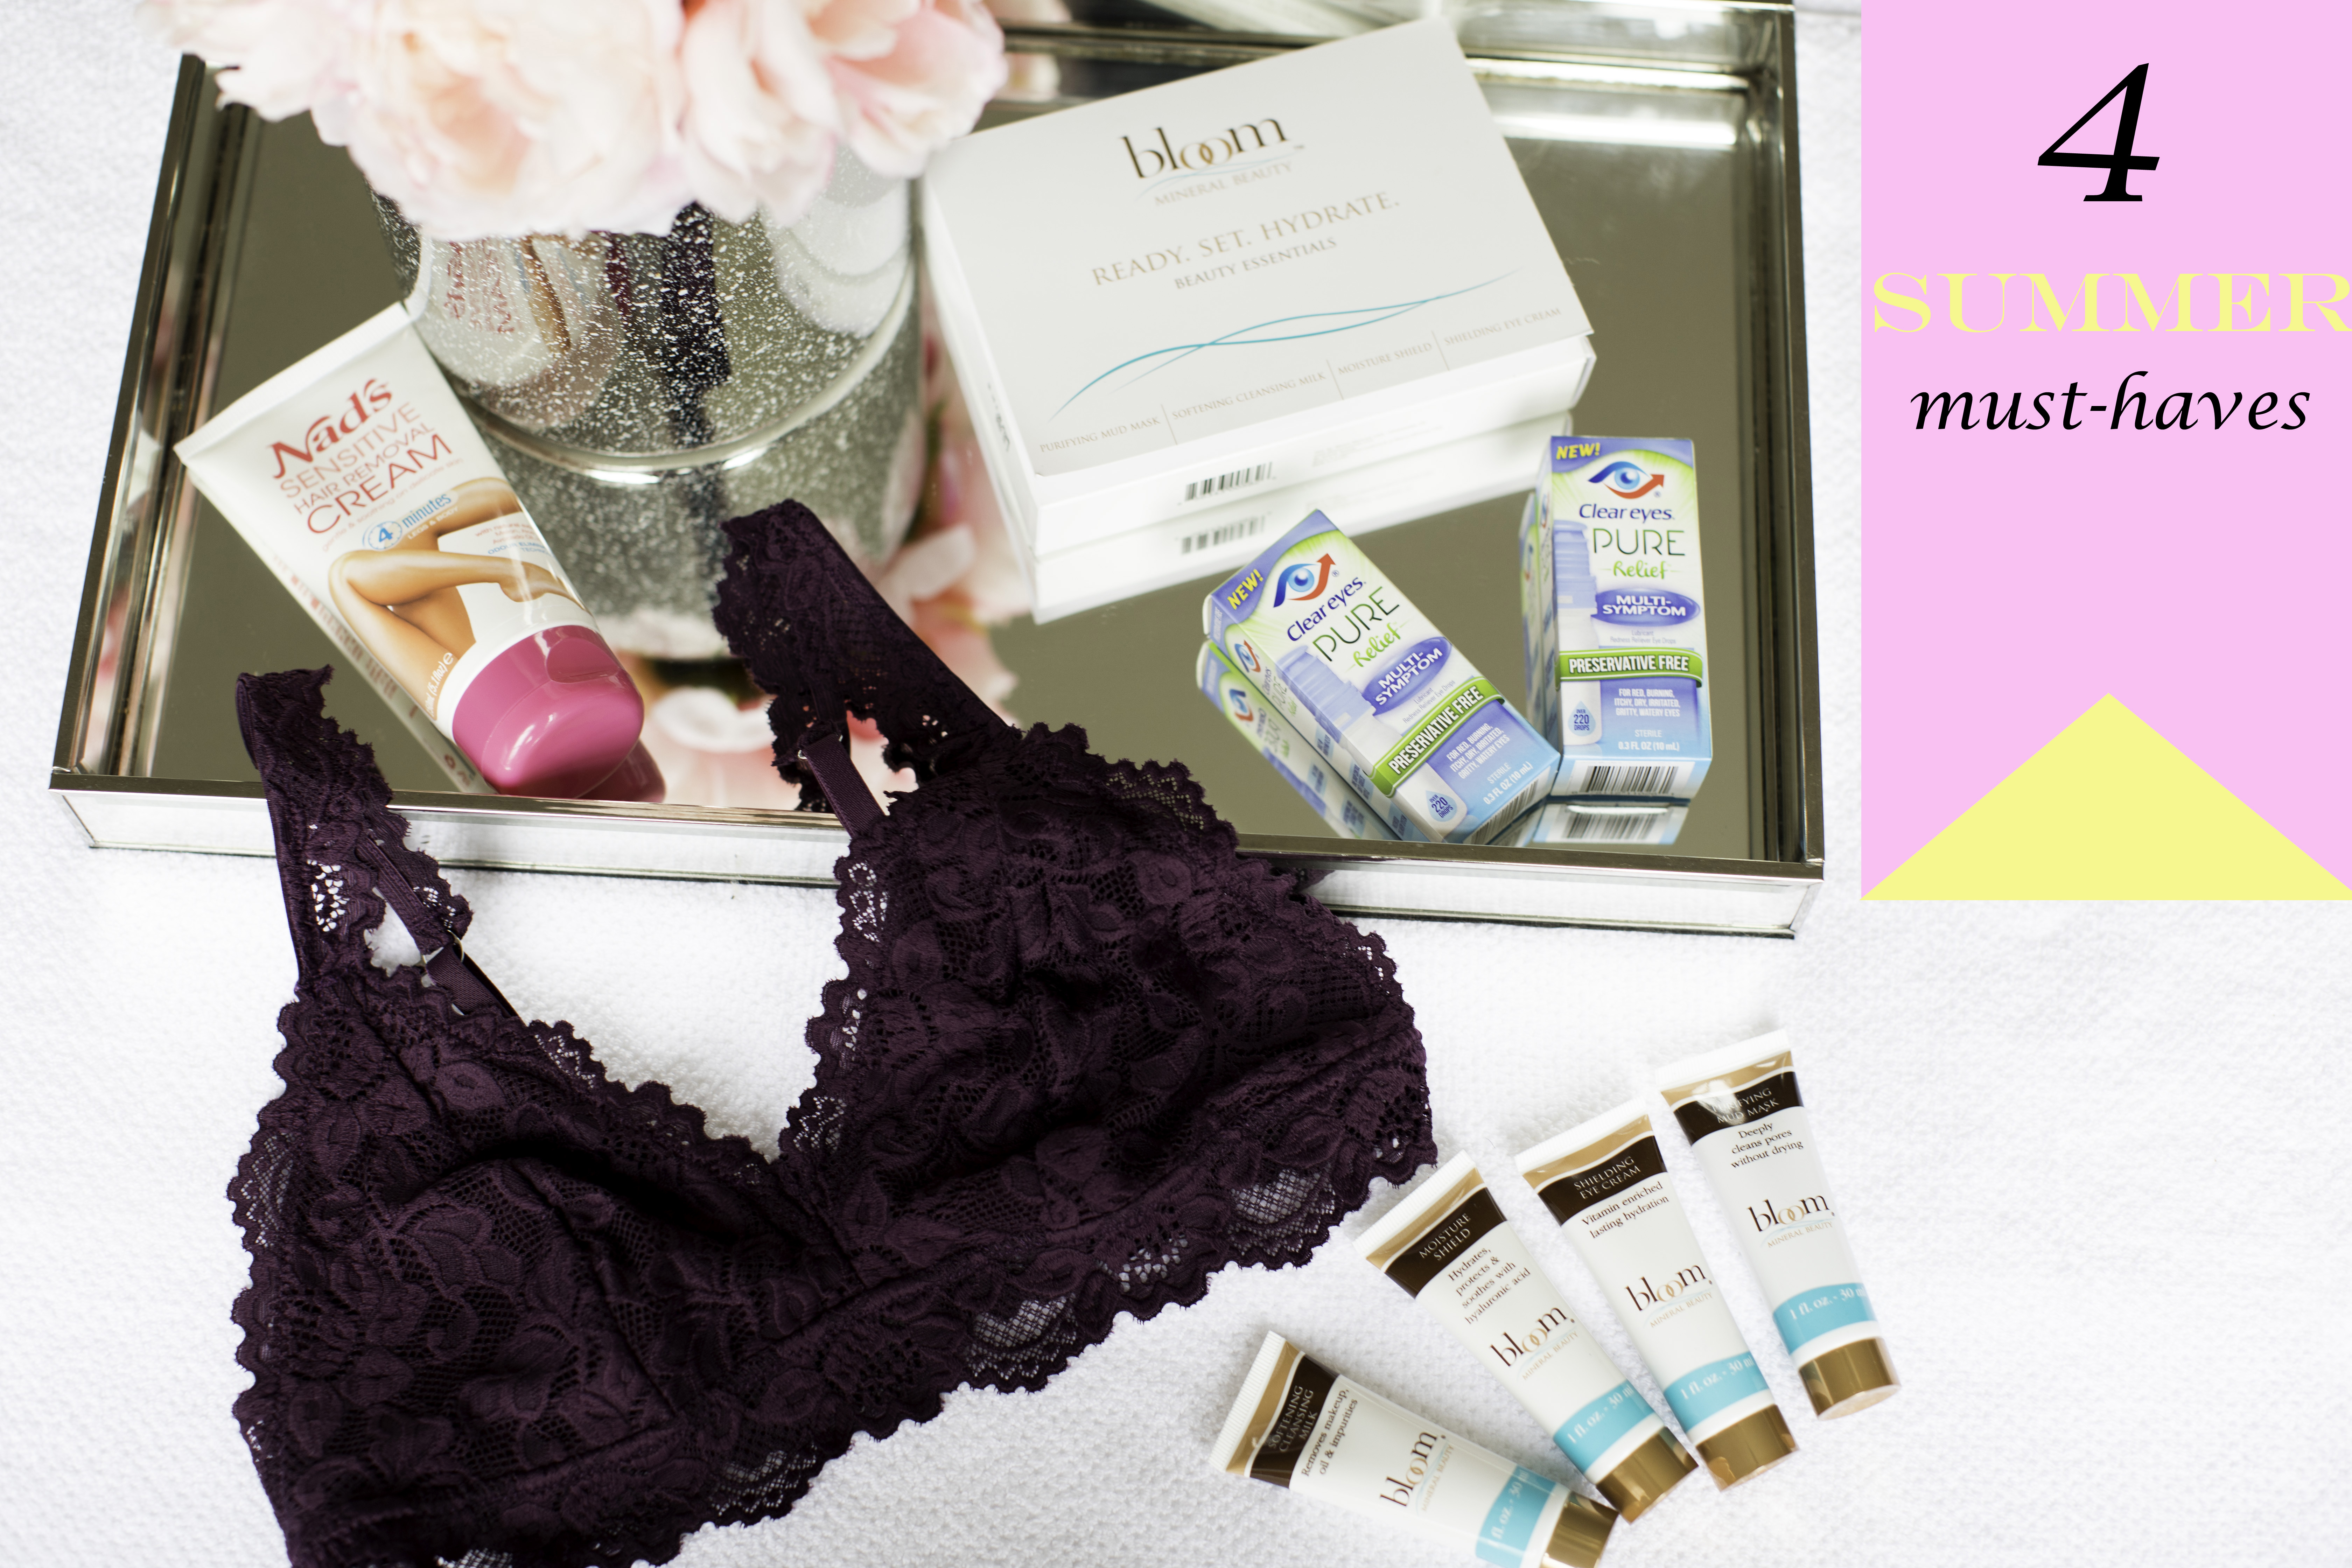 4 summer must haves, babble box, clear eyes, nad's hair removal lotion, bloom mineral beauty, coobie seamless bra